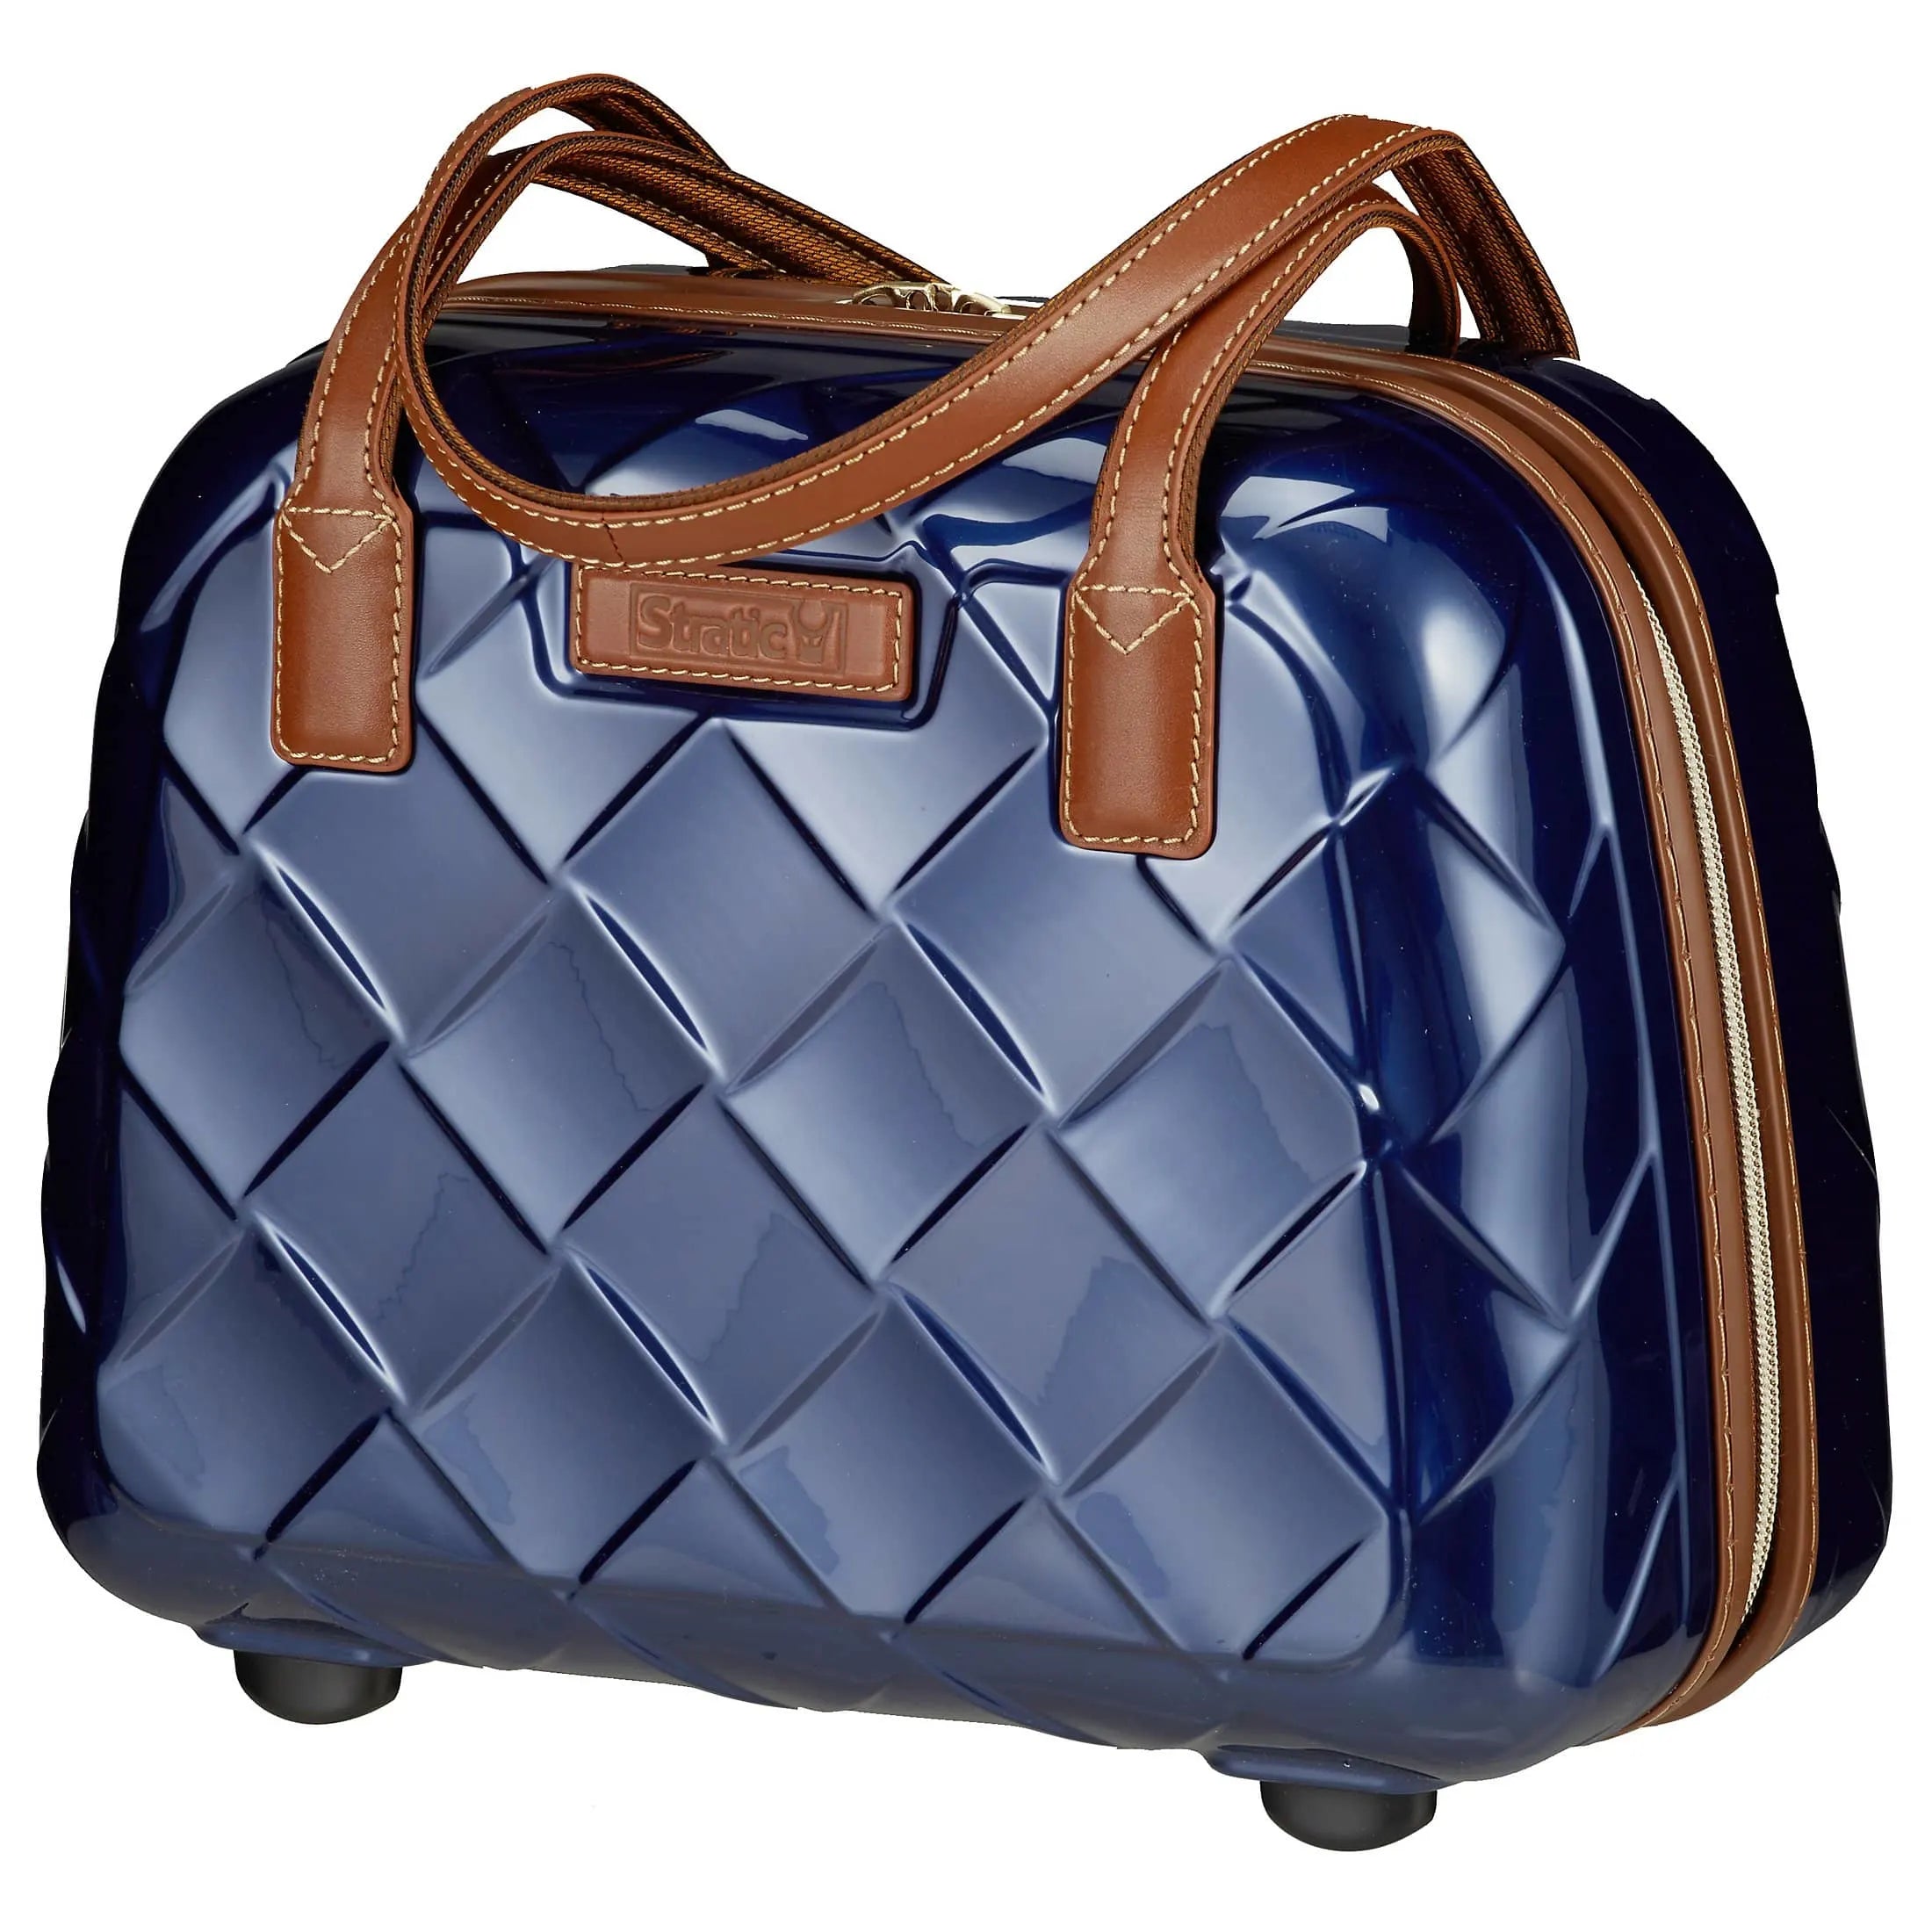 Stratic Leather & More Beautycase 36 cm - champagne